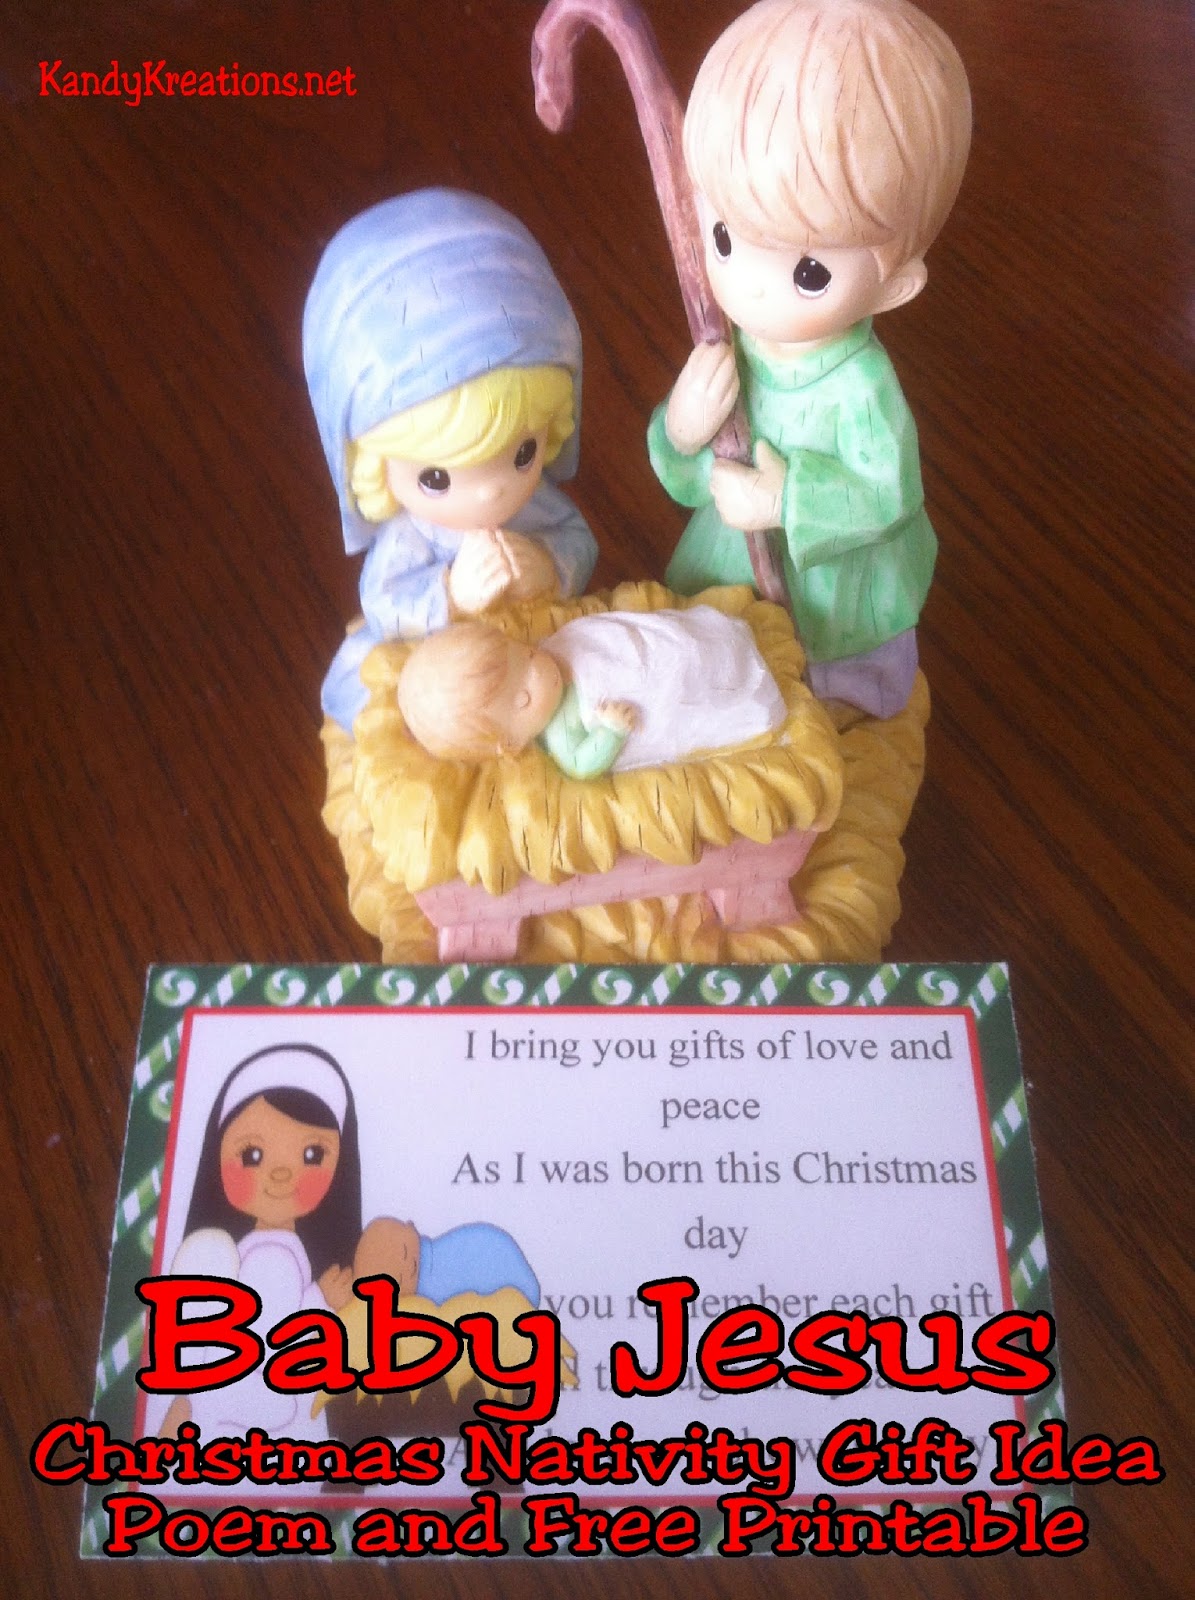 The twelve days of Christmas have come to a close with this last gift in our Nativity advent gift idea for neighbors, friends, and family. Day twelve is a gift of the Baby Jesus and some yummy chocolate presents.#christmas #advent #jesus #religious #bagtopper #diypartymomblog